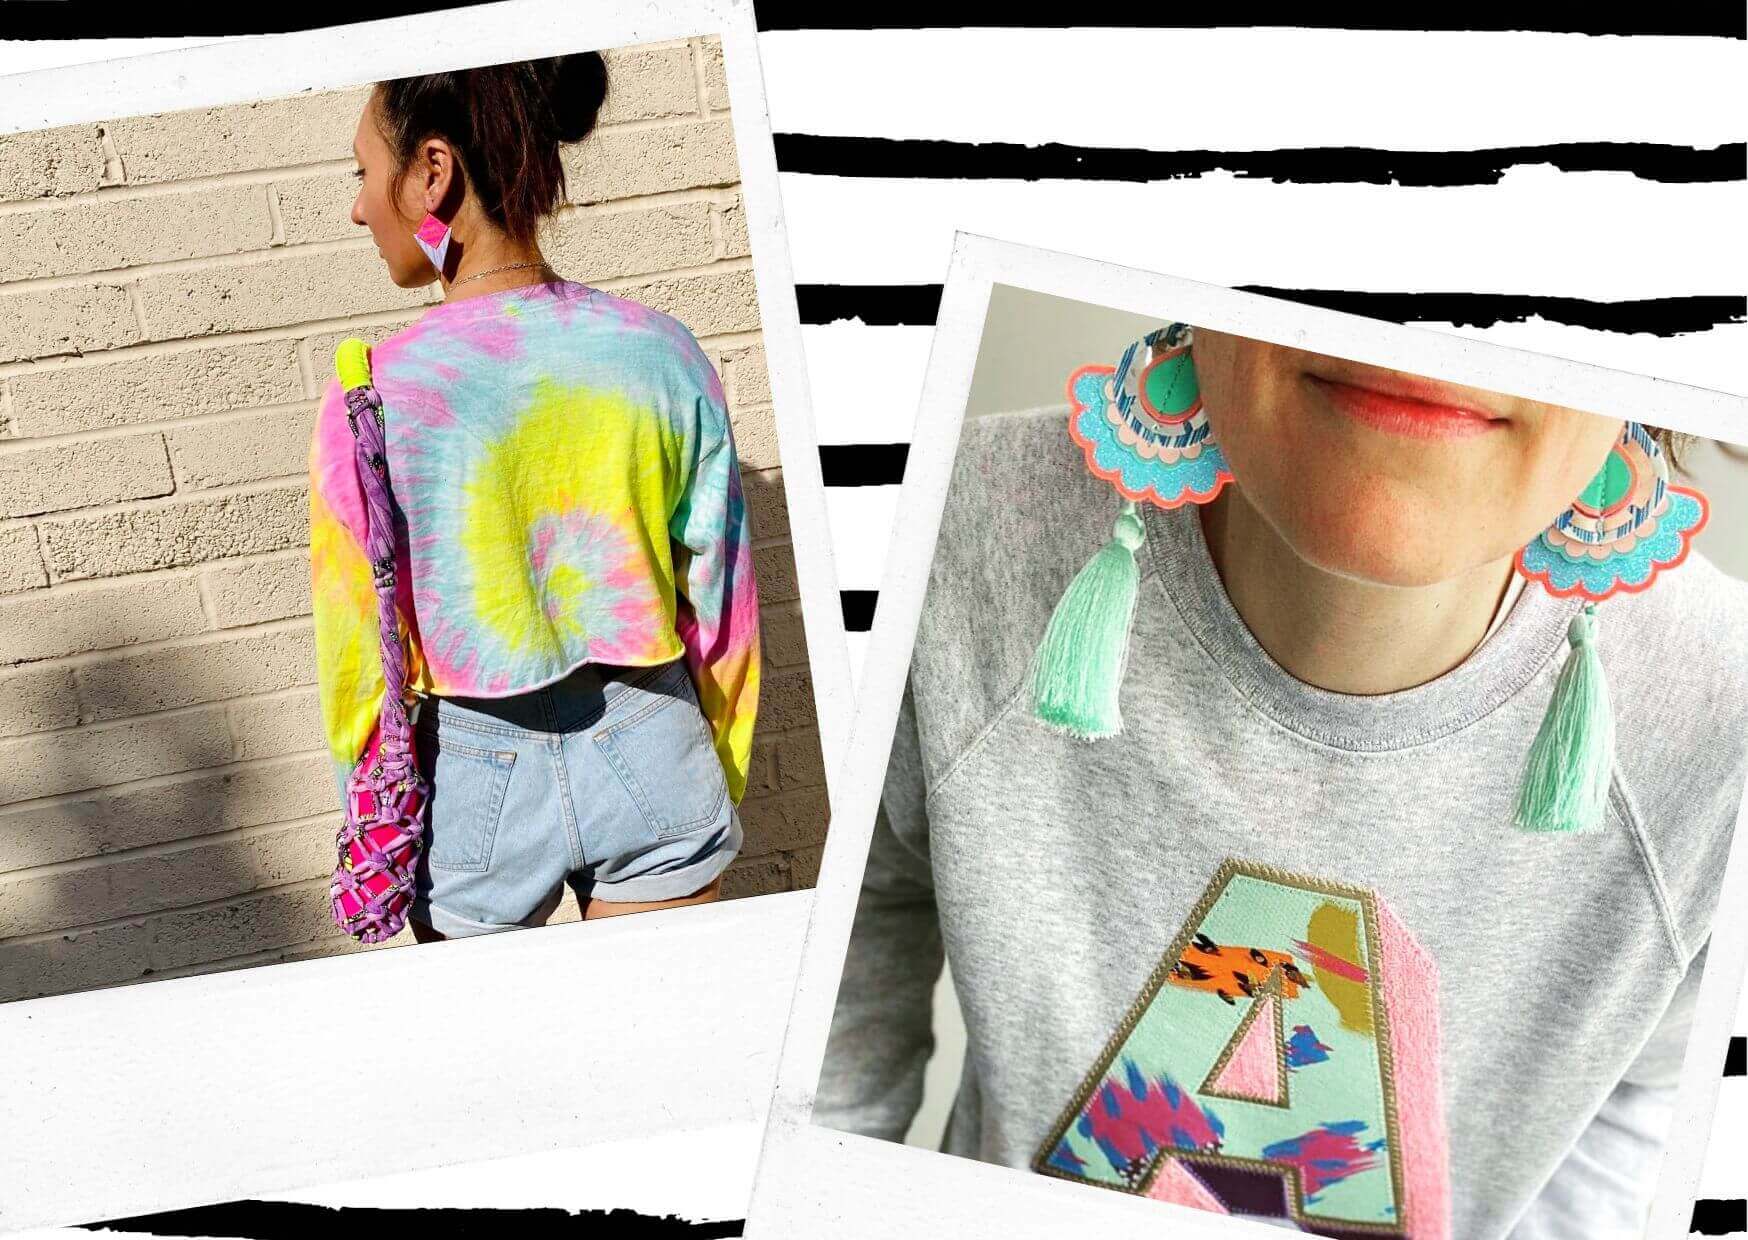 Two polaroid photos sit on a black and white patterned background. The photo on the left features a woman wearing a colourful tie dye t-shirt and graphic stripe earrings, standing with her back to the camera. The photo on the right is a close up of the lower half of a woman's face and chest. She is wearing a grey sweatshirt with a patterned letter A and some minty green statement tassel earrings